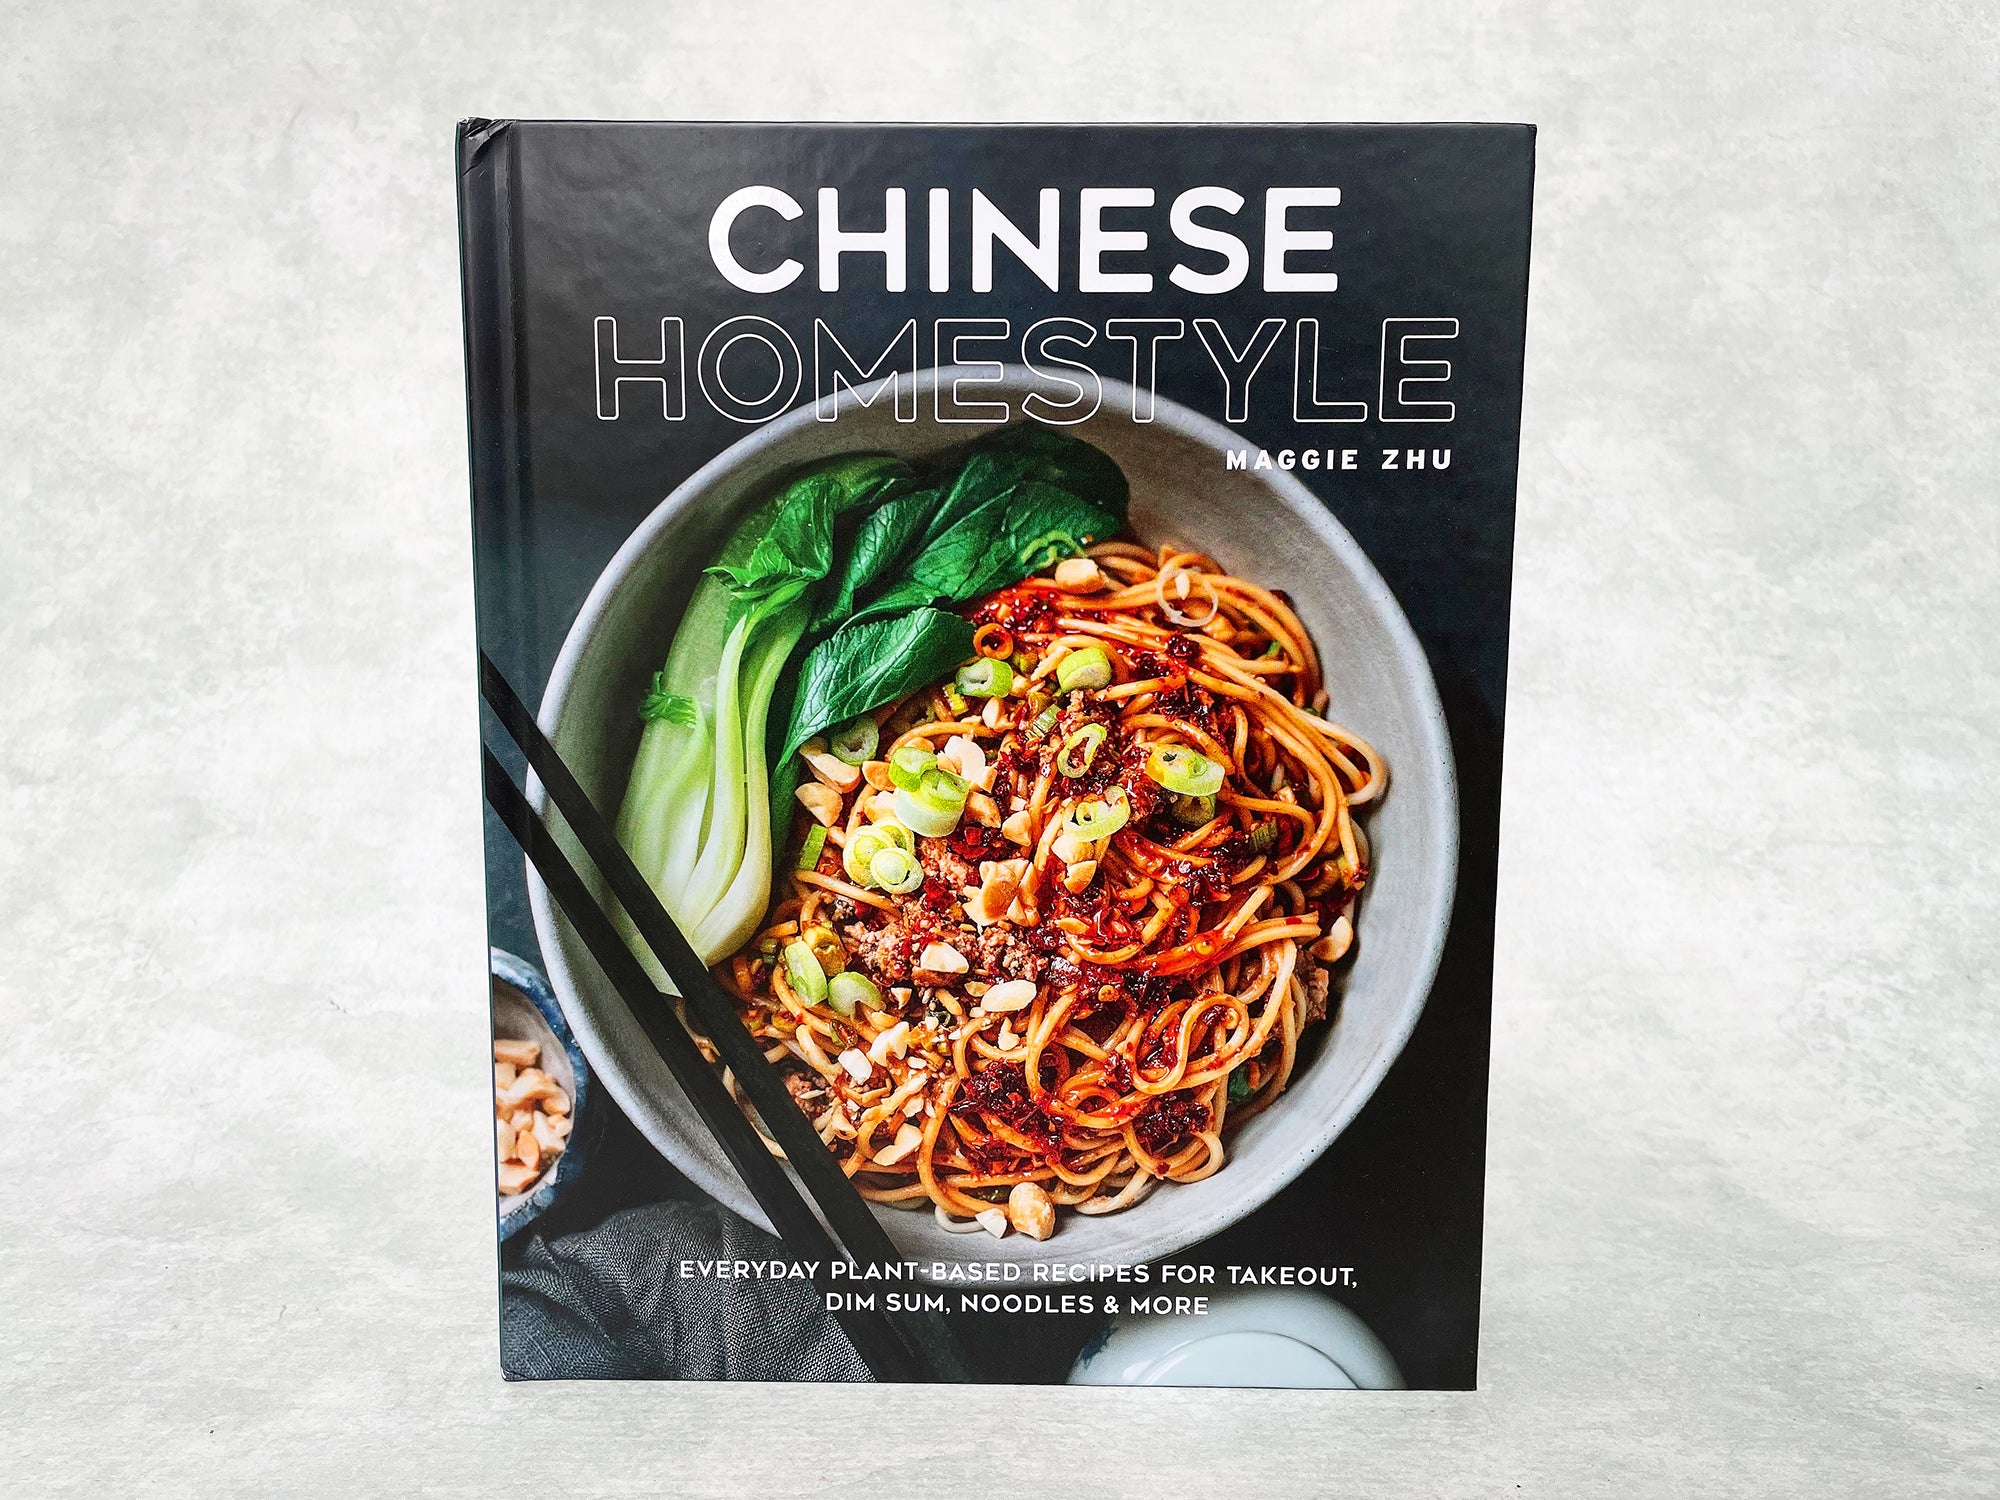 Chinese Homestyle (Cookbook by Maggie Zhu)